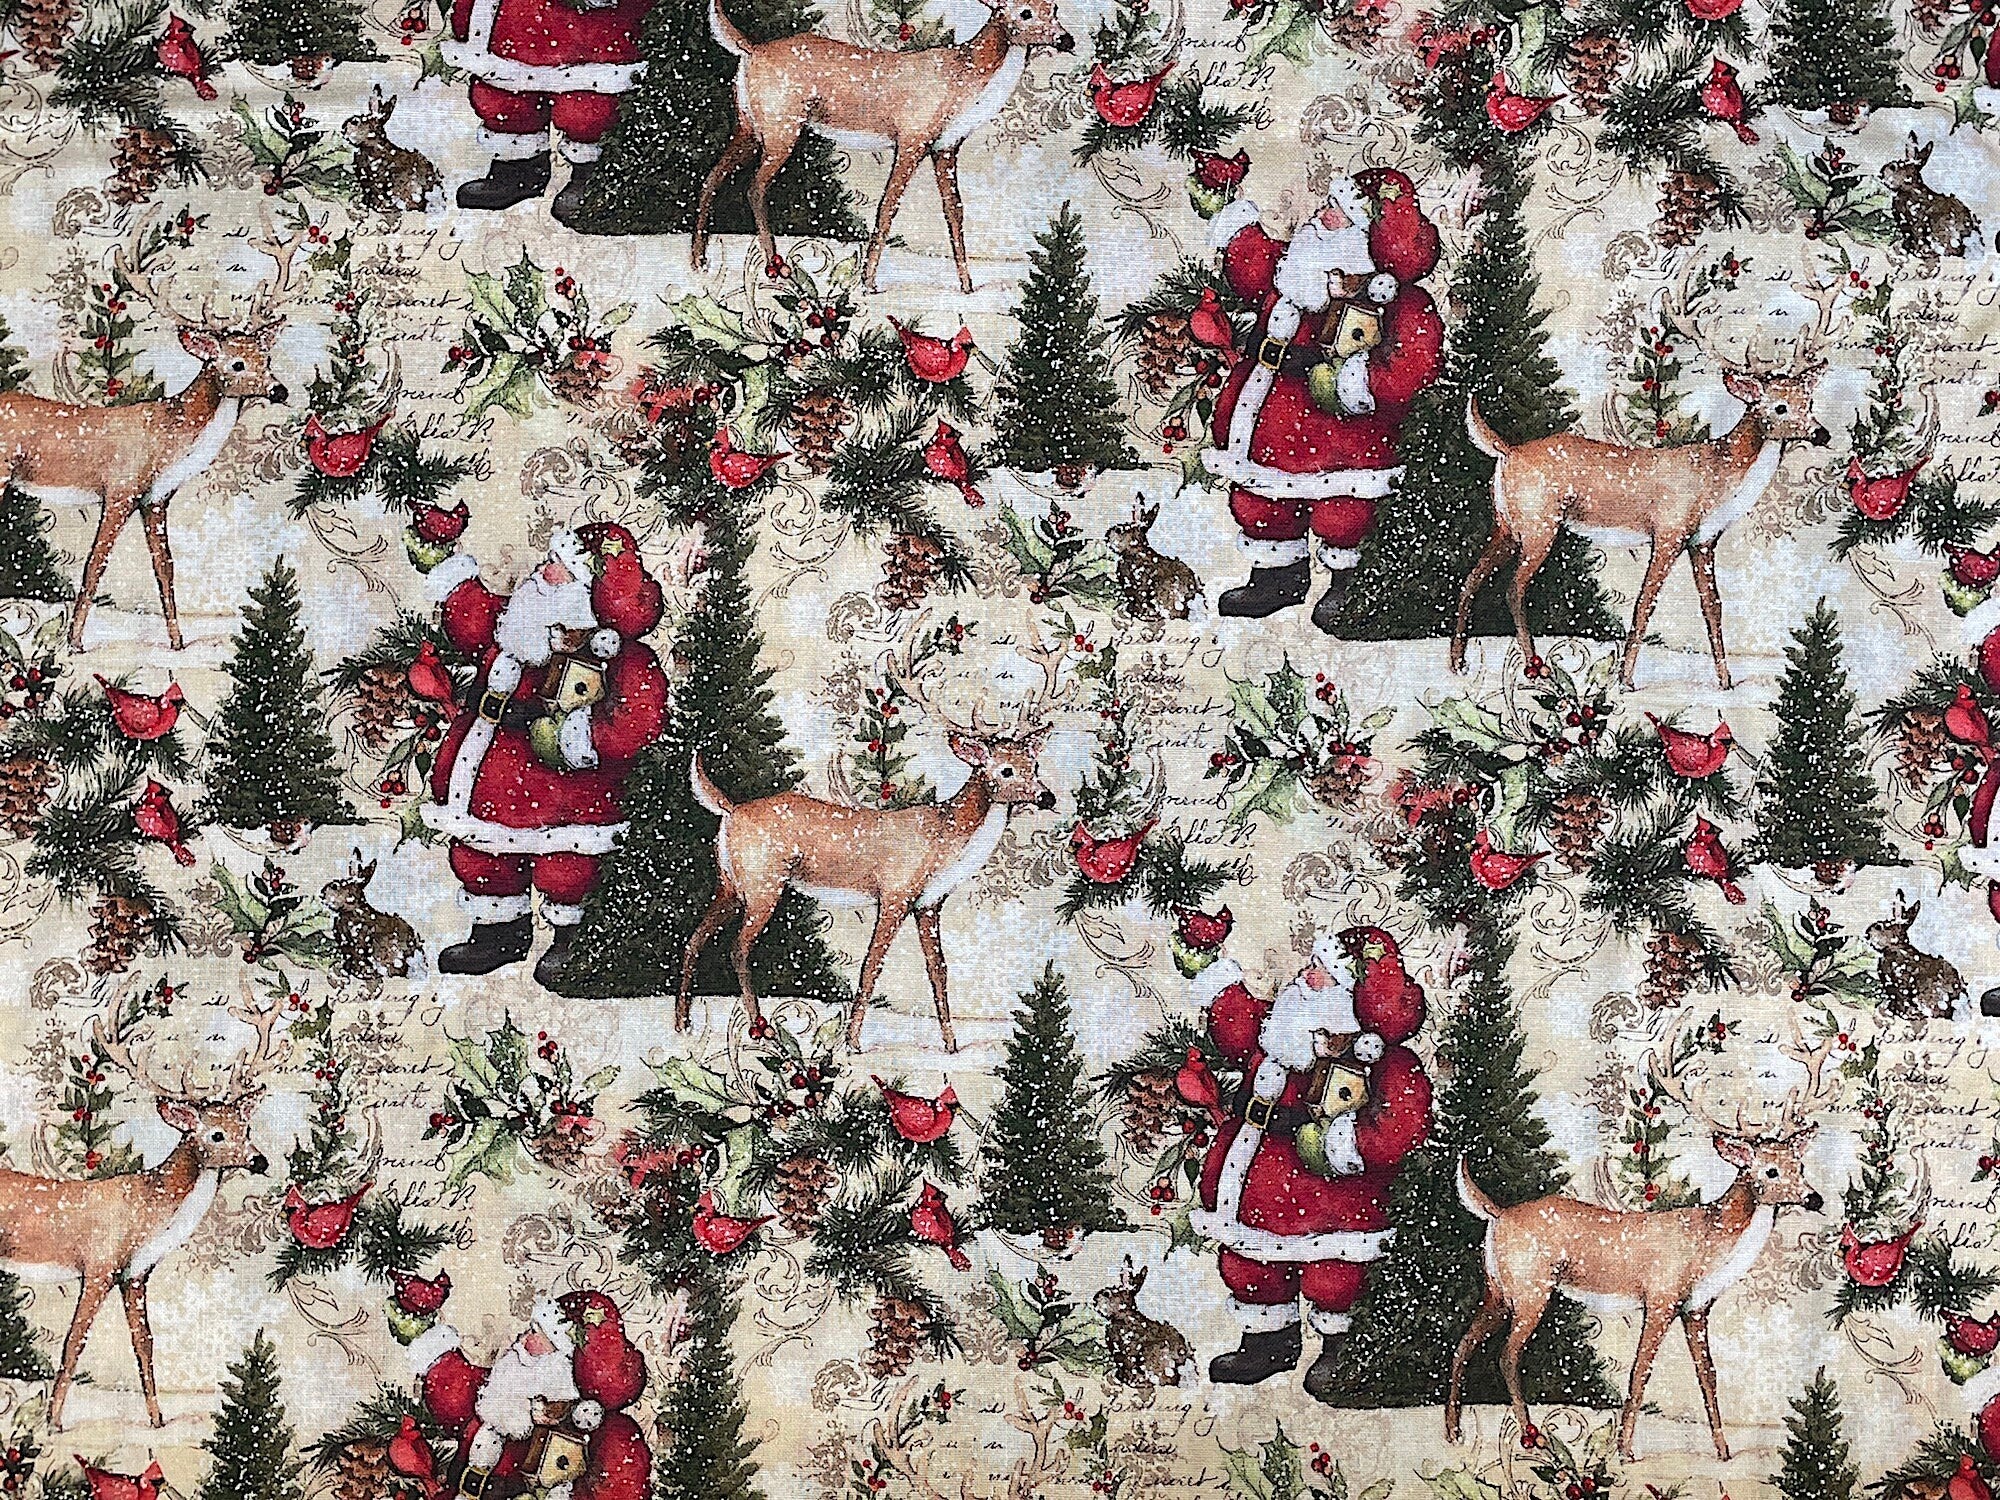 This beige cotton fabric features Santa Claus. Santa is standing next to an evergreen tree holding a cardinal. There are also deer and bunnies throughout the fabric.